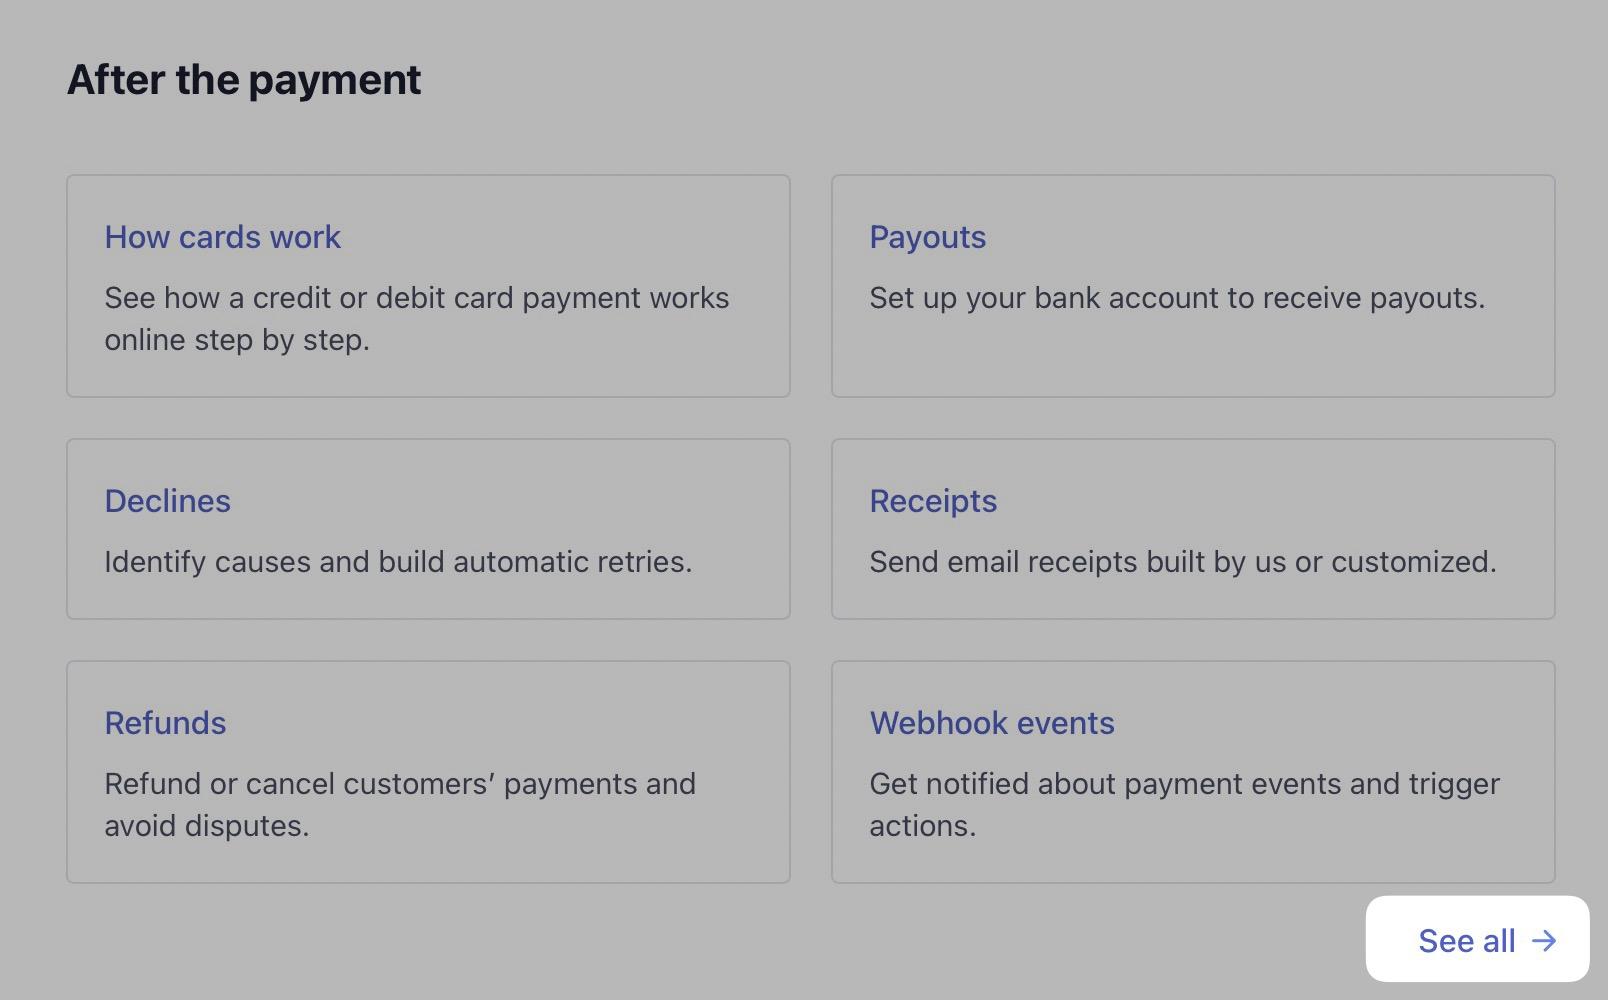 Stripe's "after payment" page